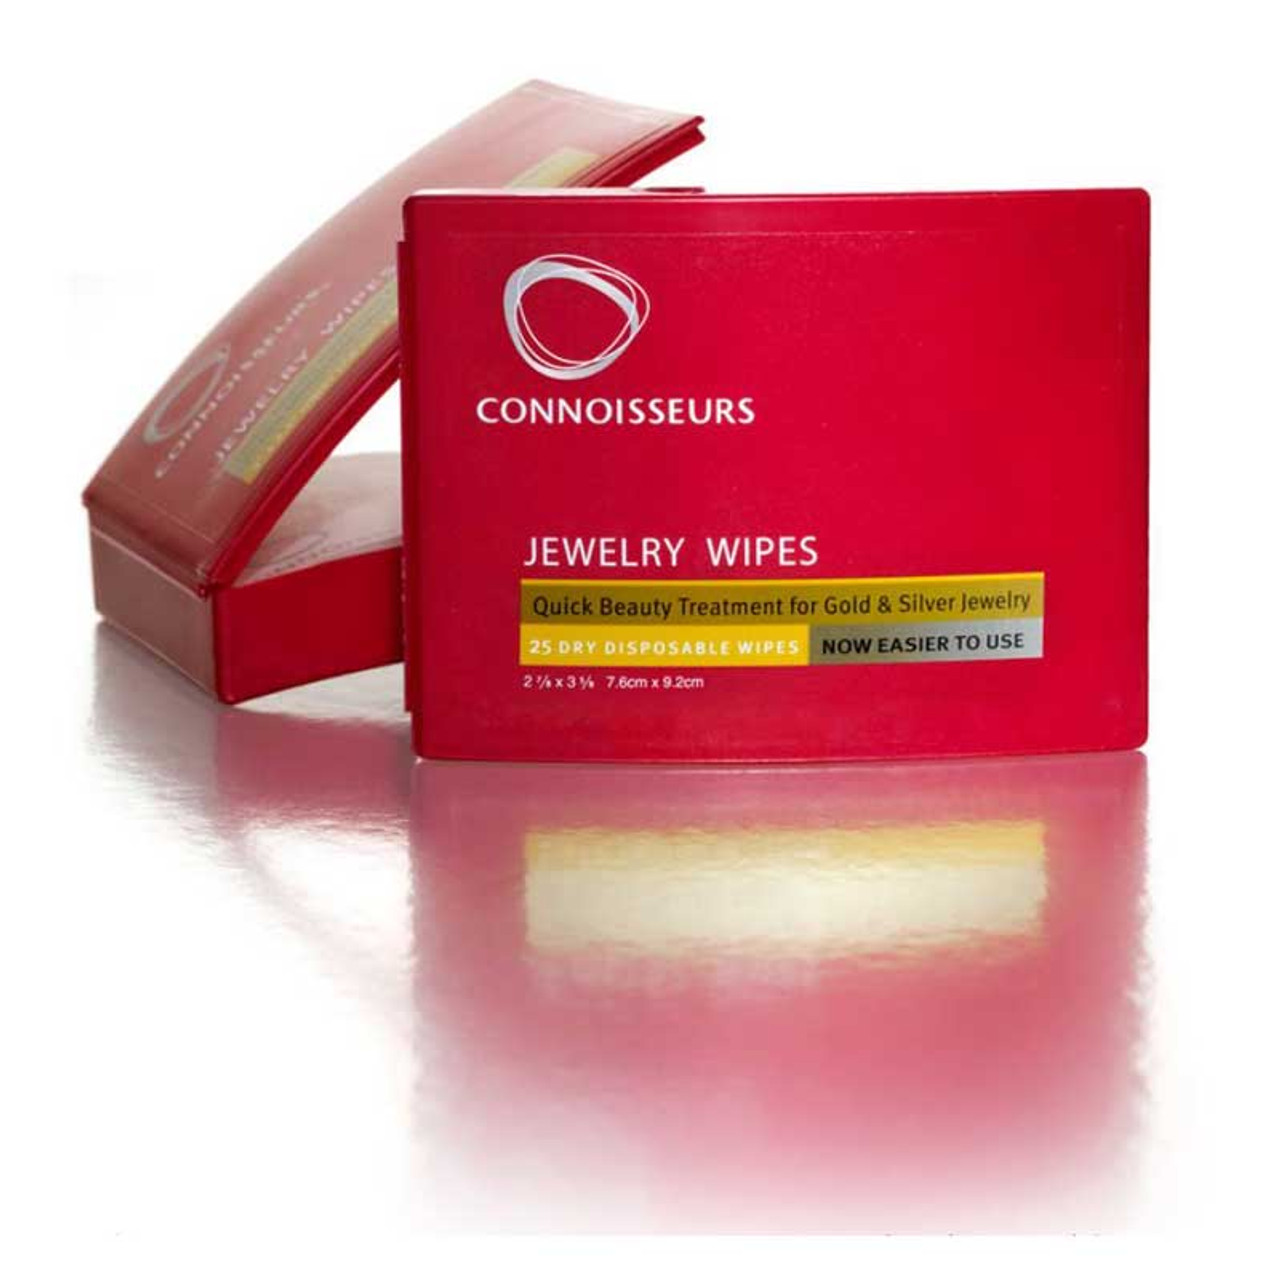 Connoisseurs Jewelry Cleaner Wipes 25 Wipe Dispenser